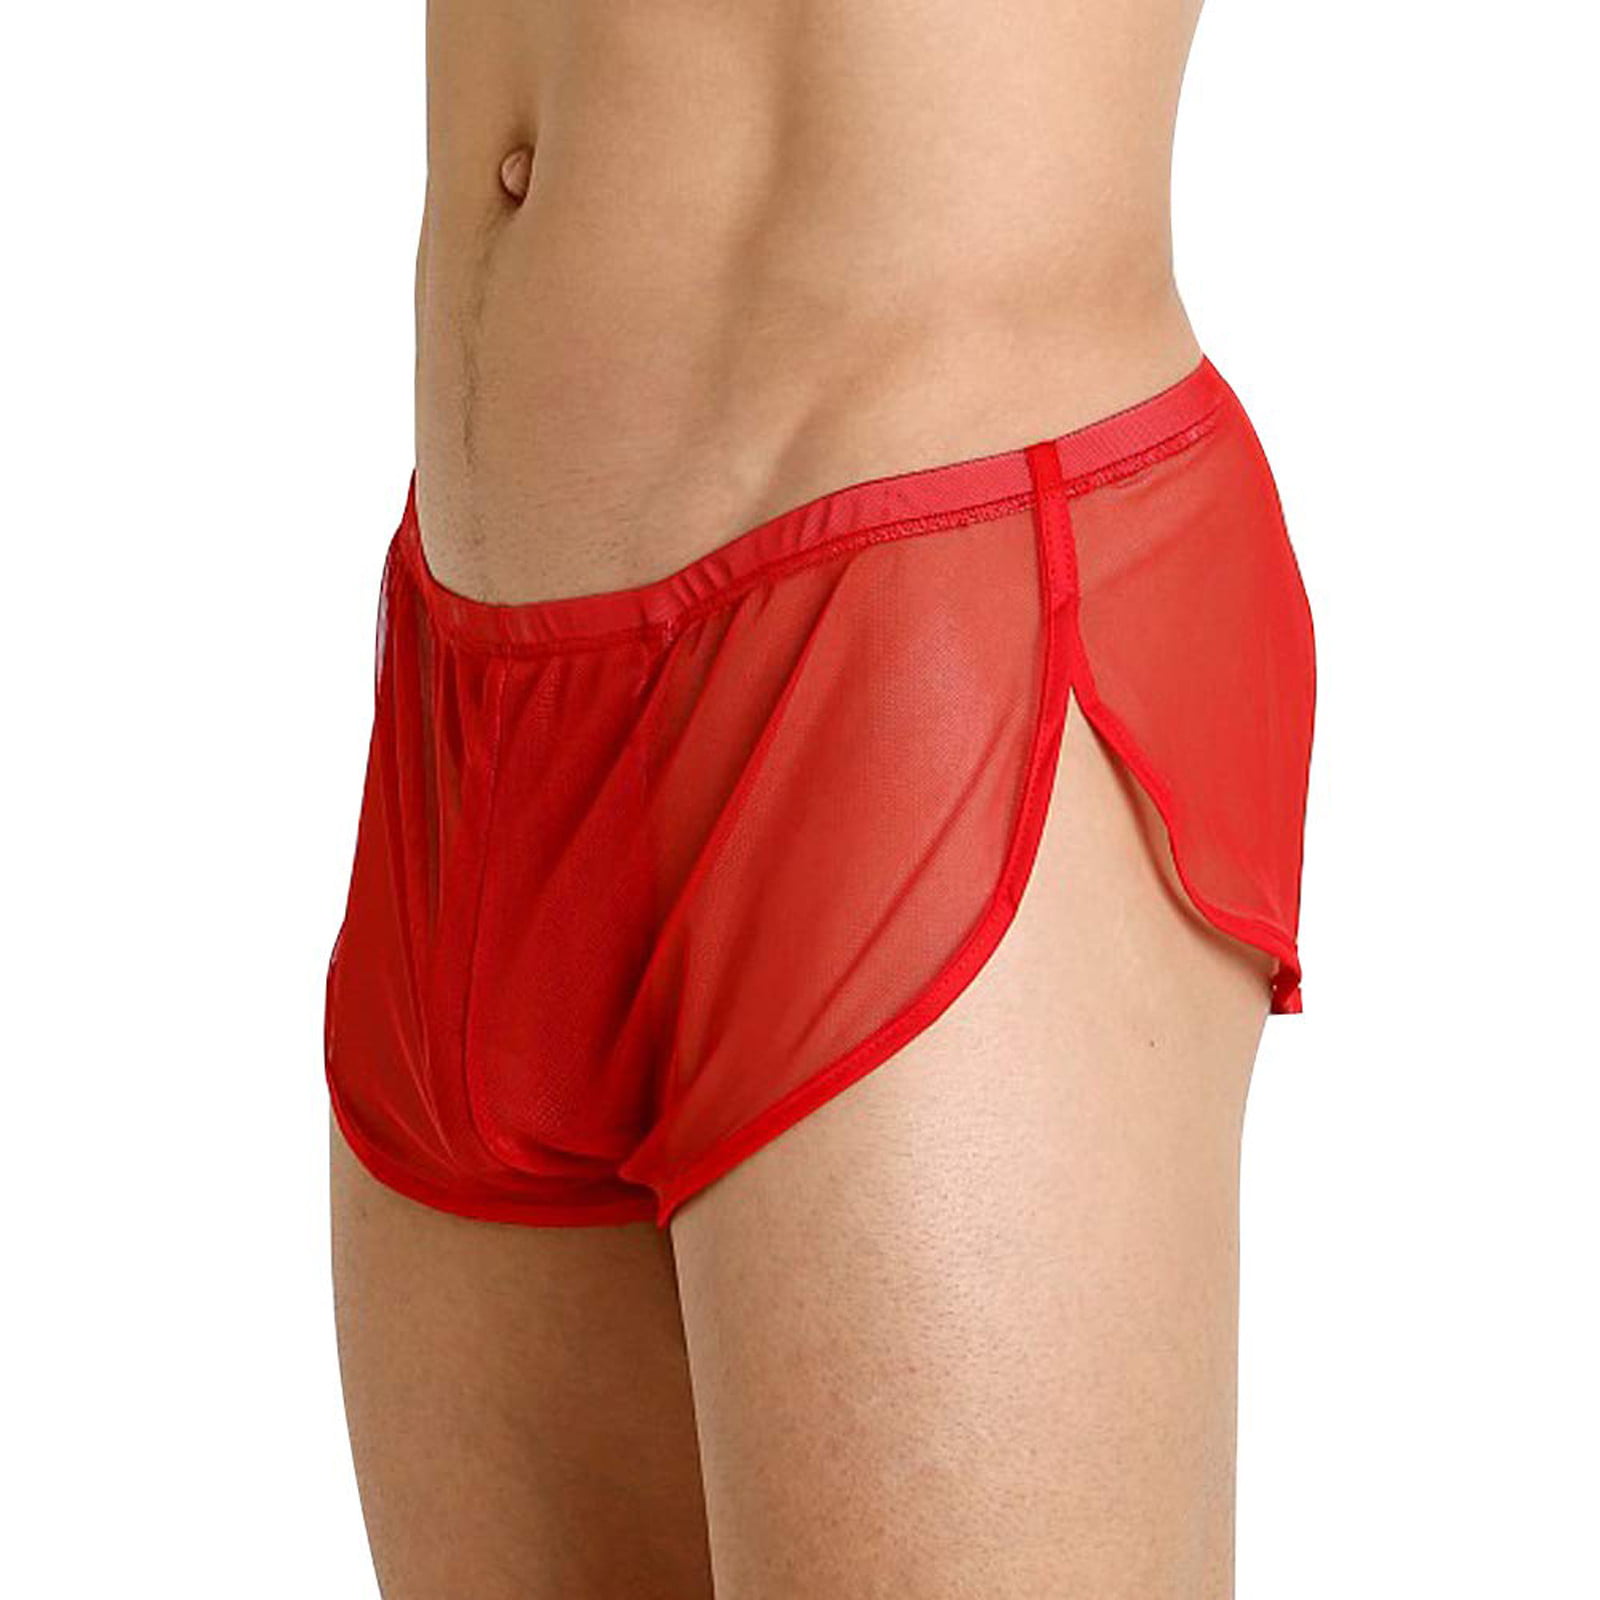 adviicd Women Lingerie No Show Underwear for Seamless High Cut Briefs  Mid-waist Soft No Panty Lines Red 3X-Large